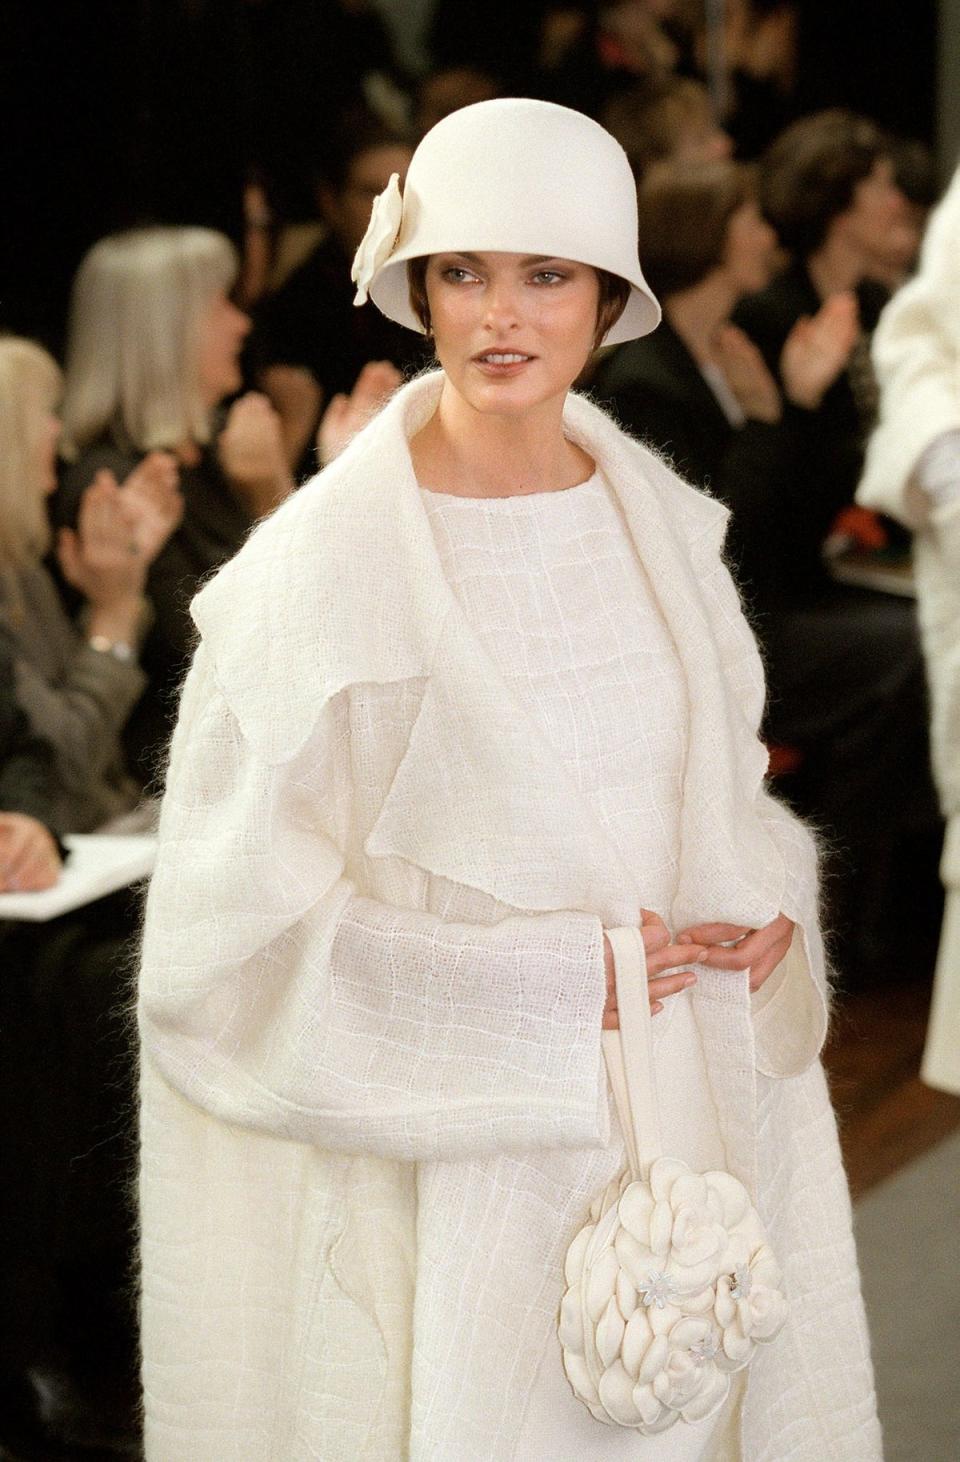 Canadian model Linda Evangelista shows off a white woolen coat withthe traditionnal chanel assorted hat and purse during the presentation of Chanel’s ready-to-wear Fall/Winter 1998/99 collection designed by Karl Lagerfeld 13 March in Paris (AFP via Getty Images)